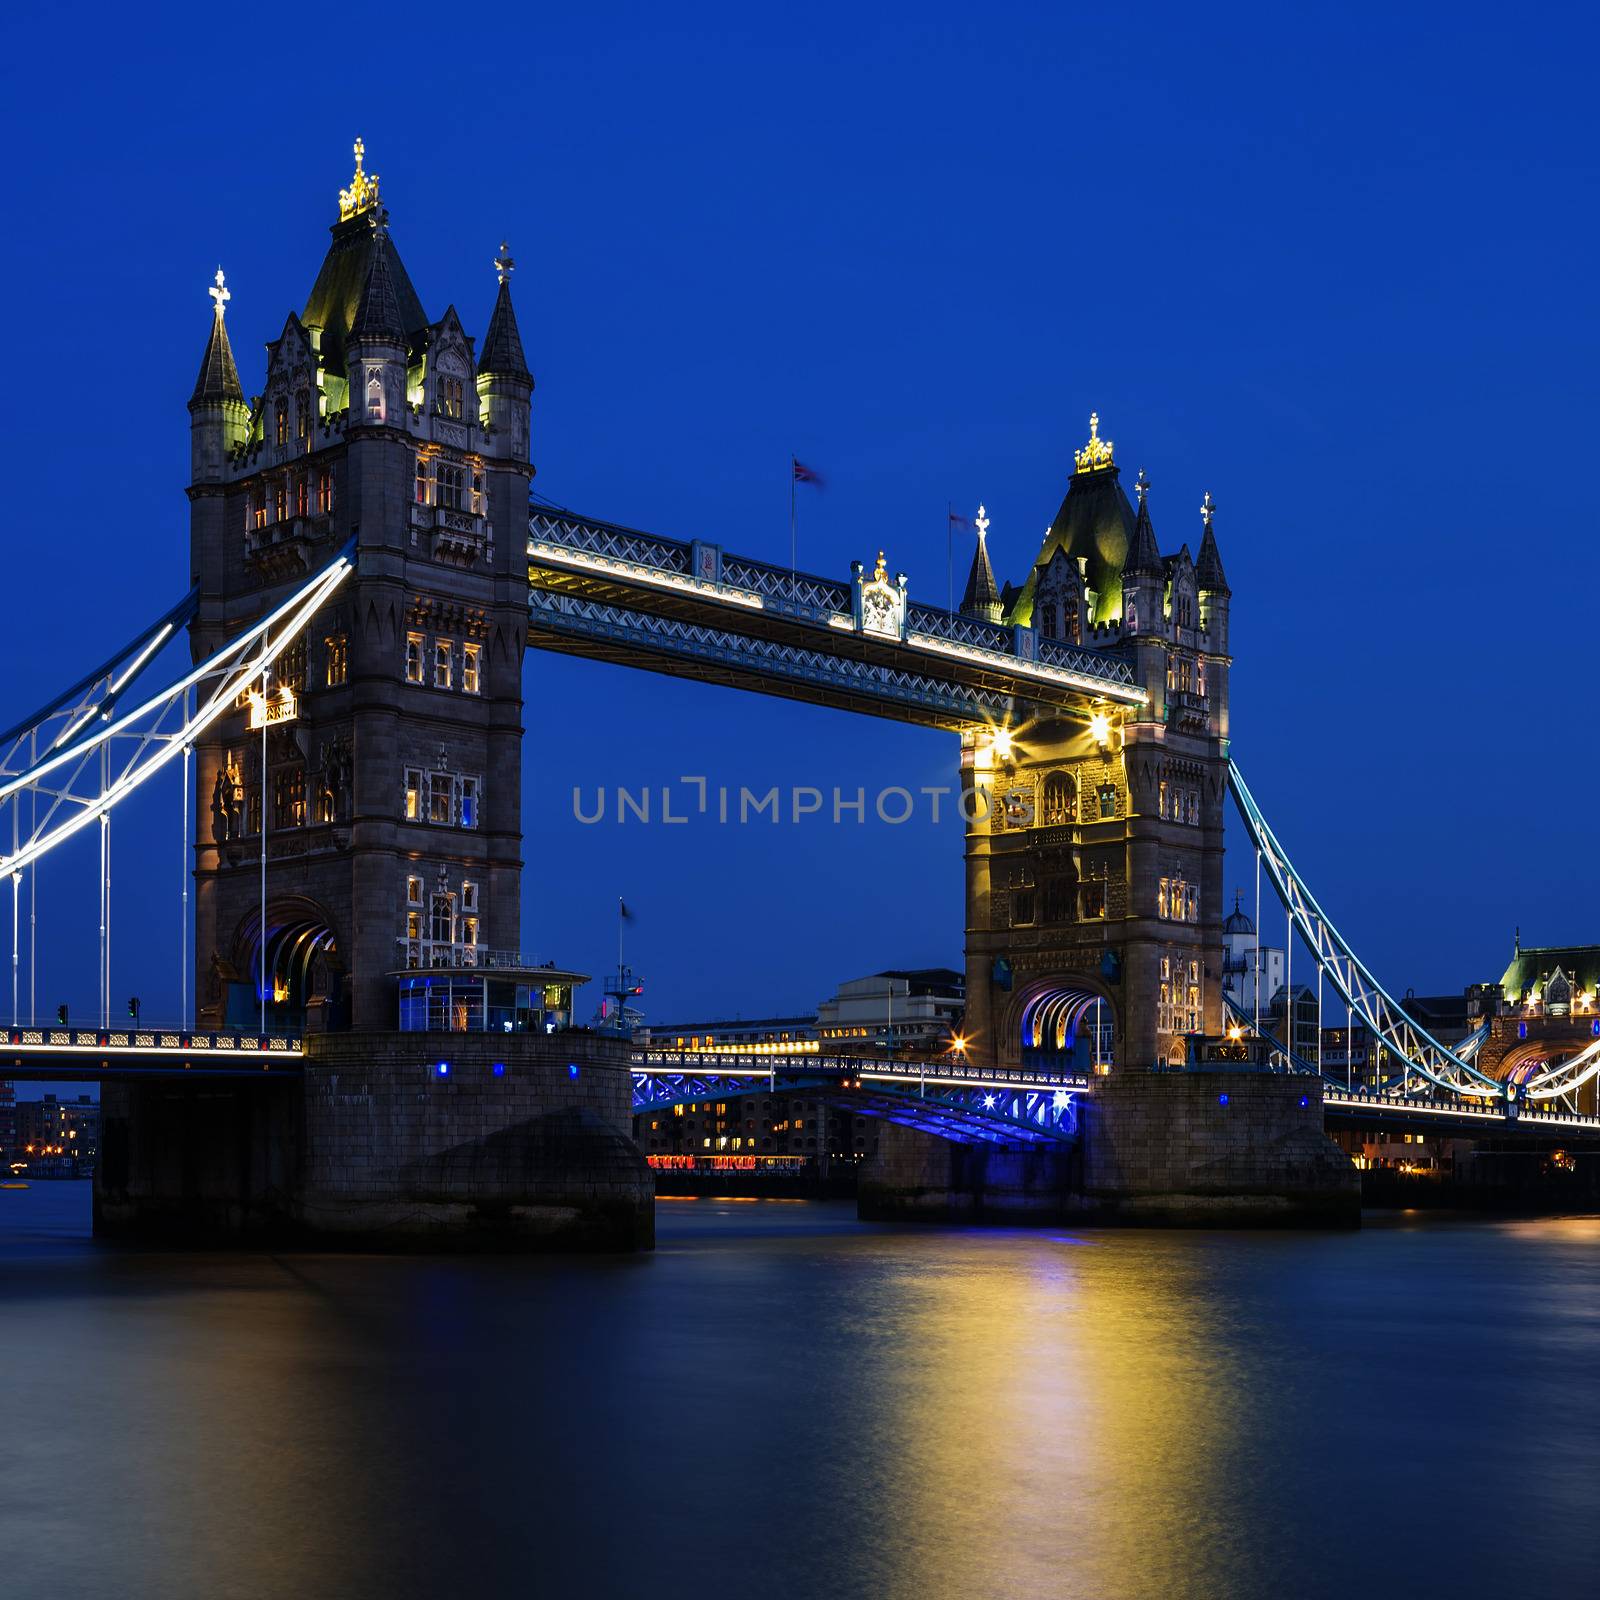 Famous Tower Bridge in the evening by vwalakte